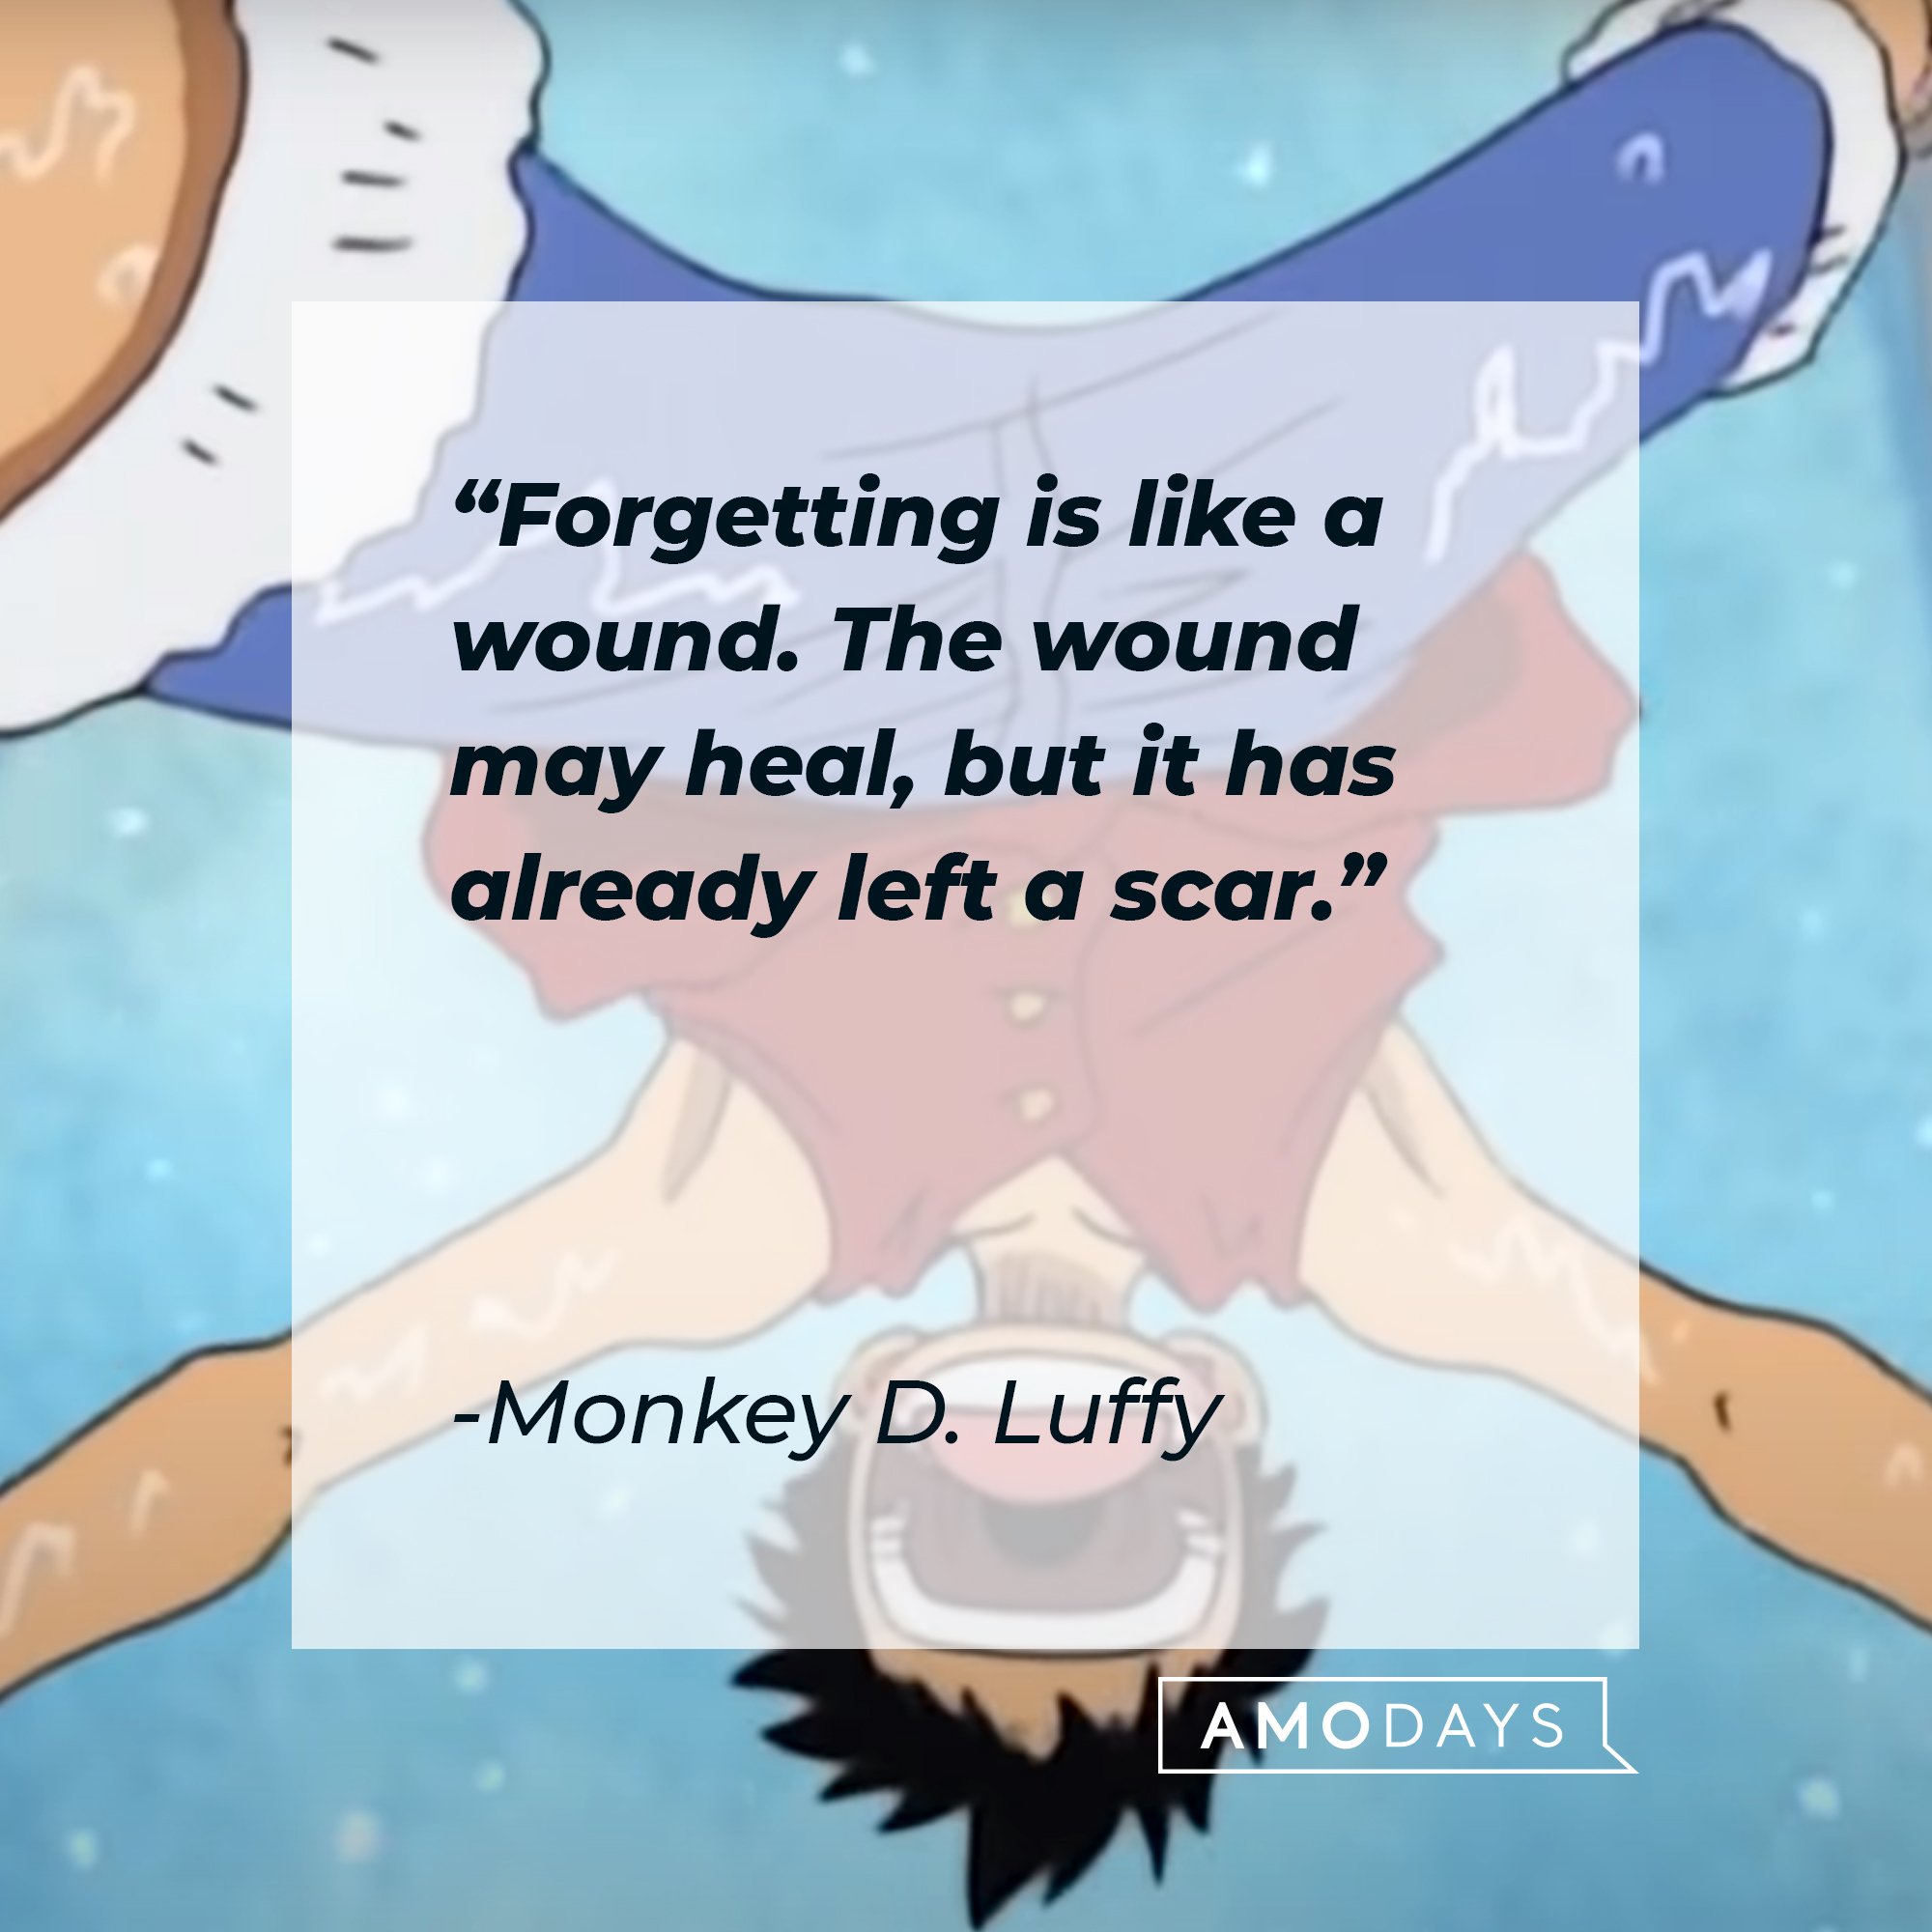 Monkey D. Luffy's quote: "Forgetting is like a wound. The wound may heal, but it has already left a scar." | Image: AmoDays